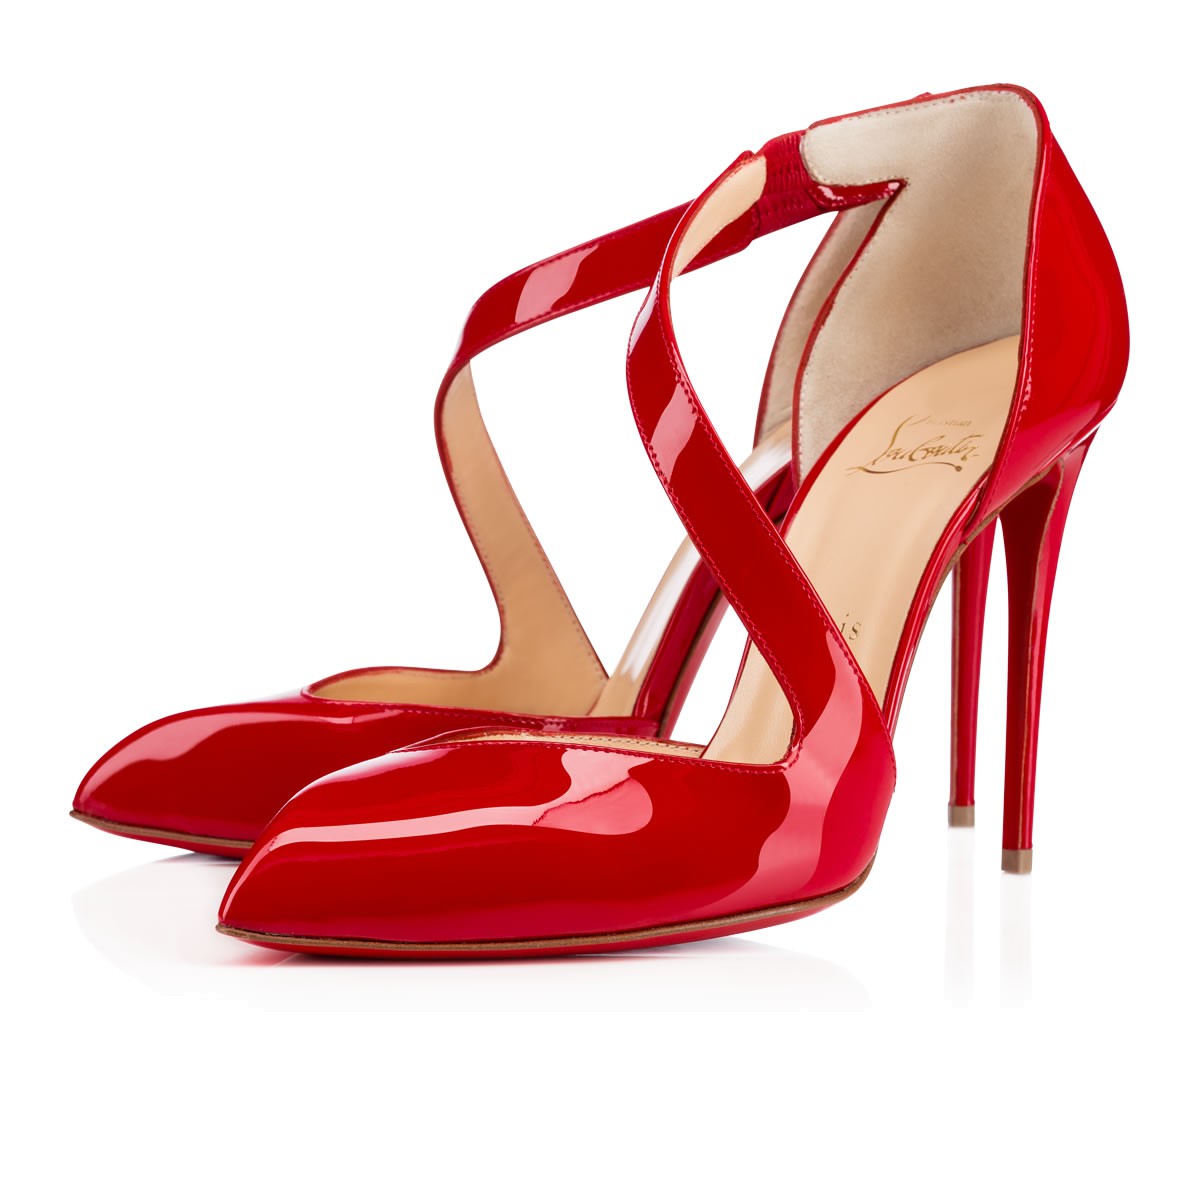 Christian Louboutin Militante Patent - New Arrivals In Oeillet | ModeSens